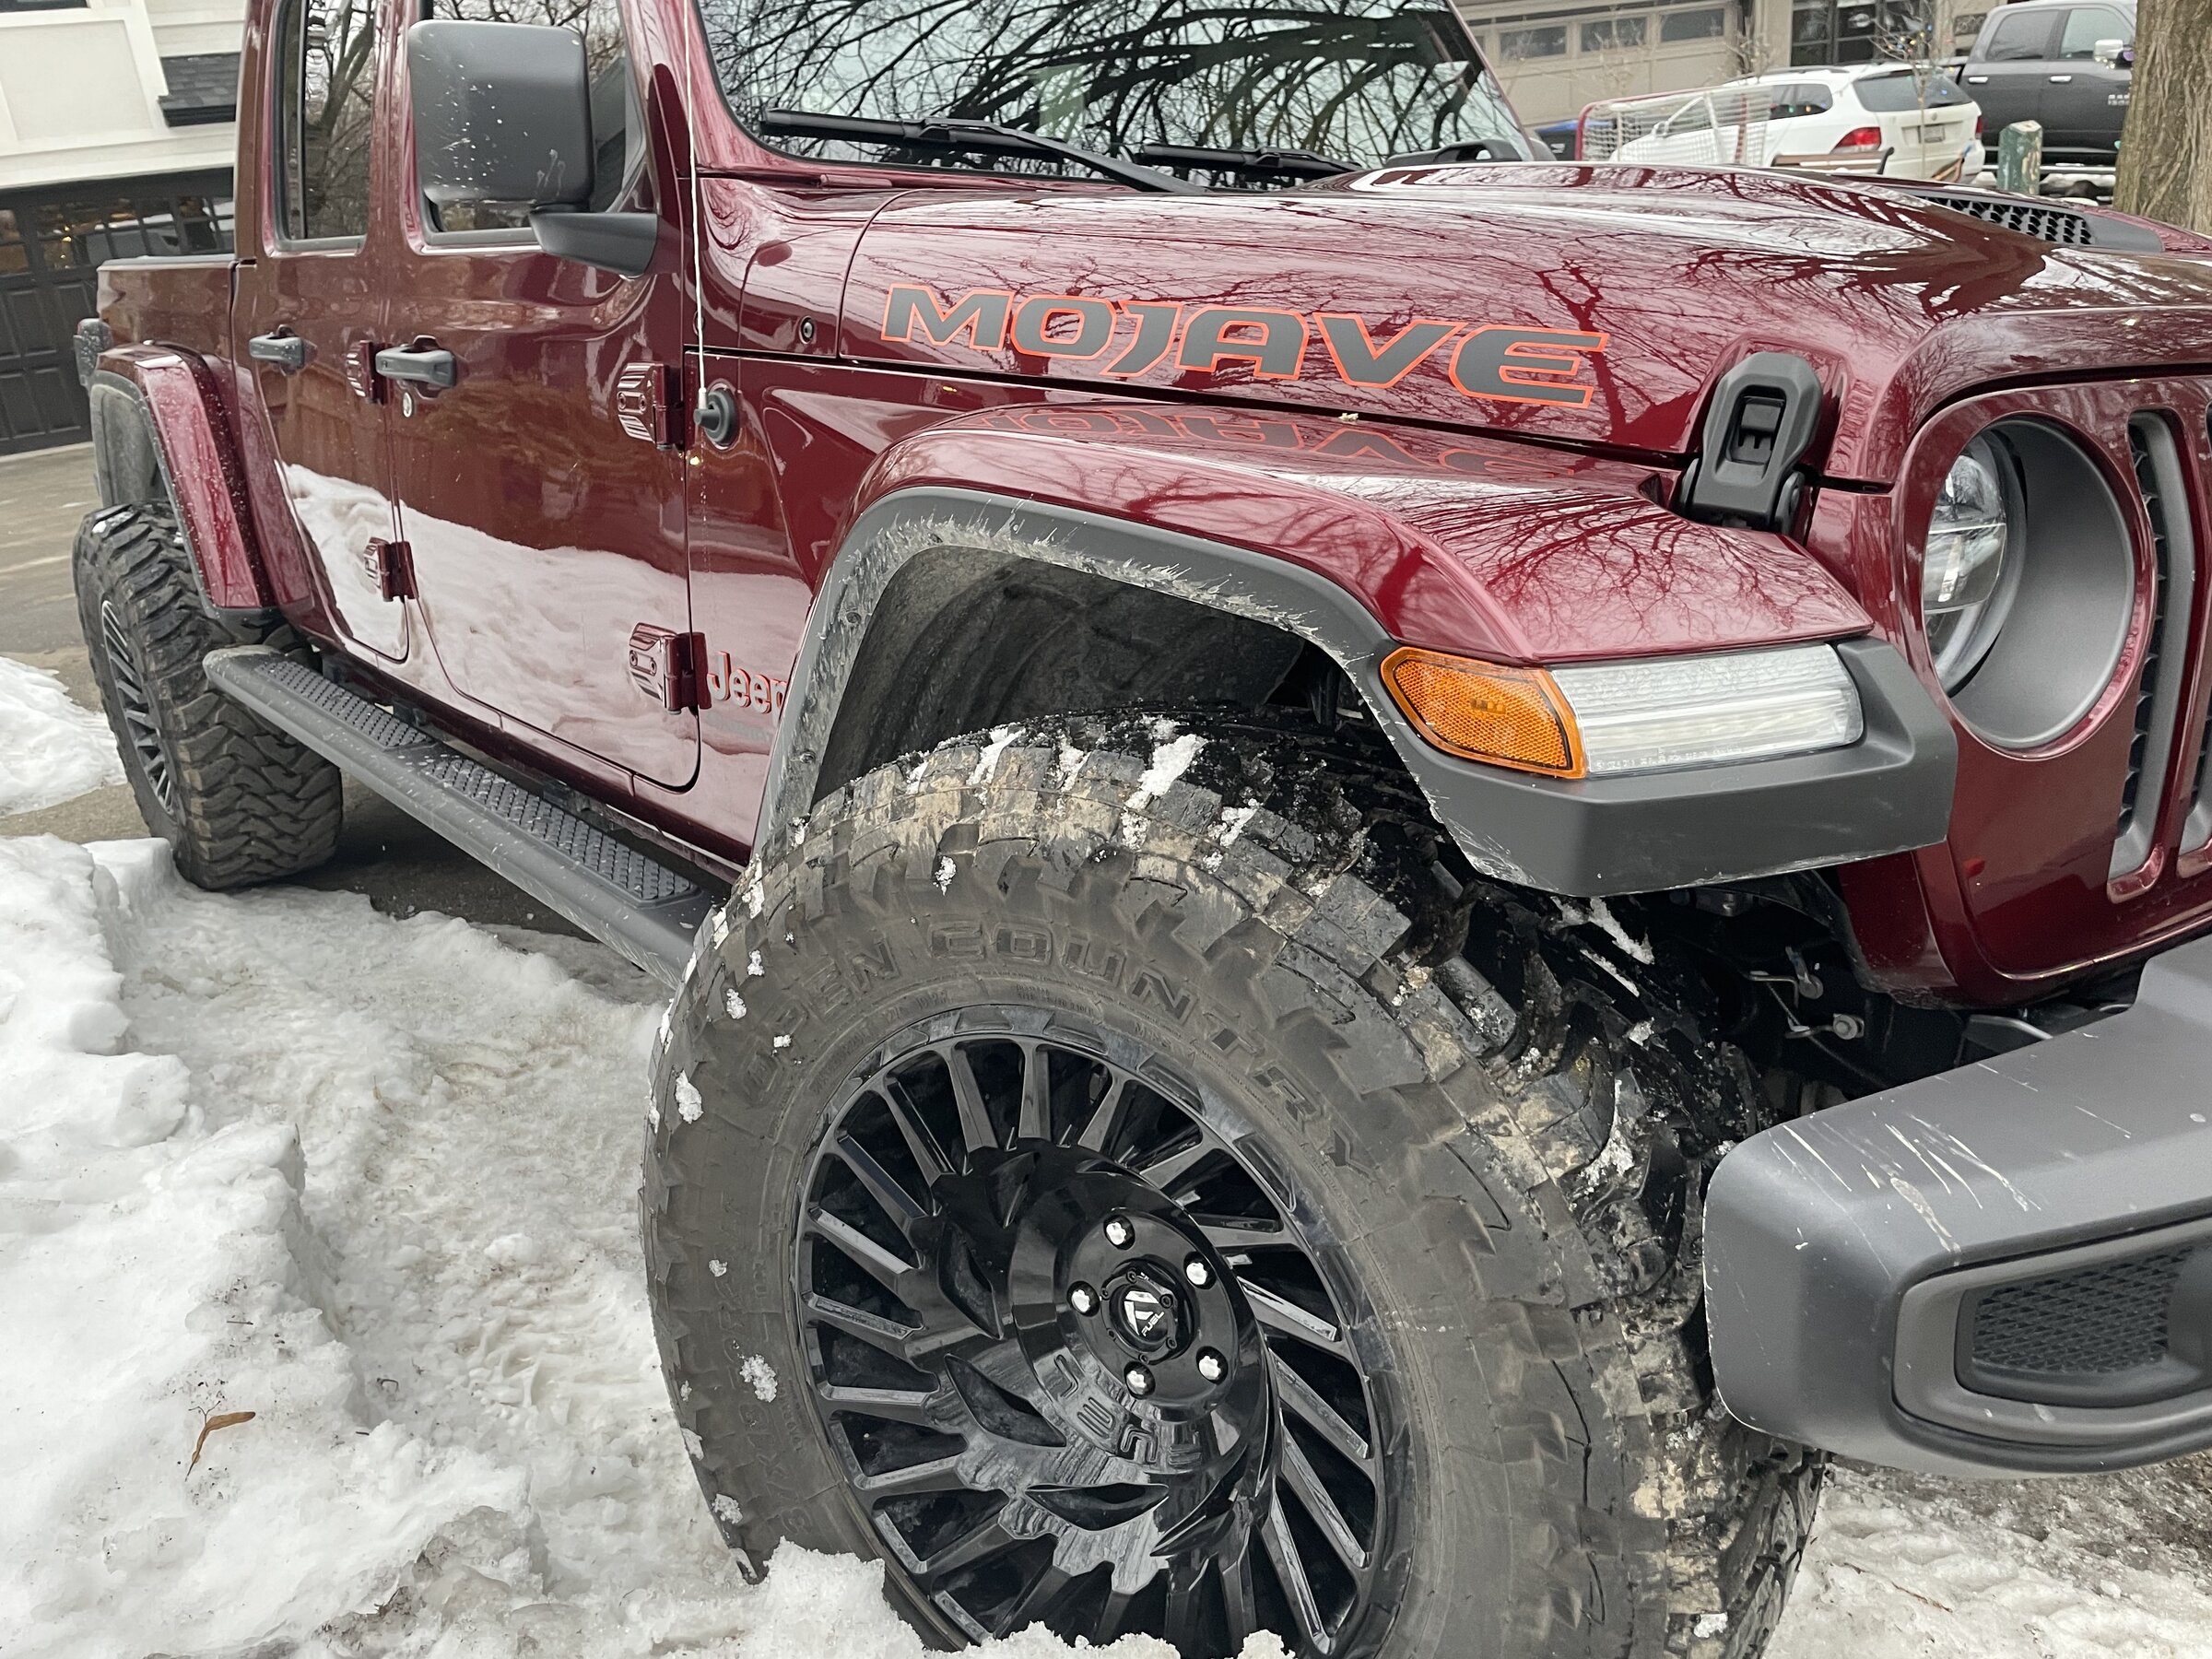 Jeep Gladiator Lets see all those Gladiators with lifts and bigger tires! 3A276A0F-0B99-4BA7-8447-F6E02433F6B6